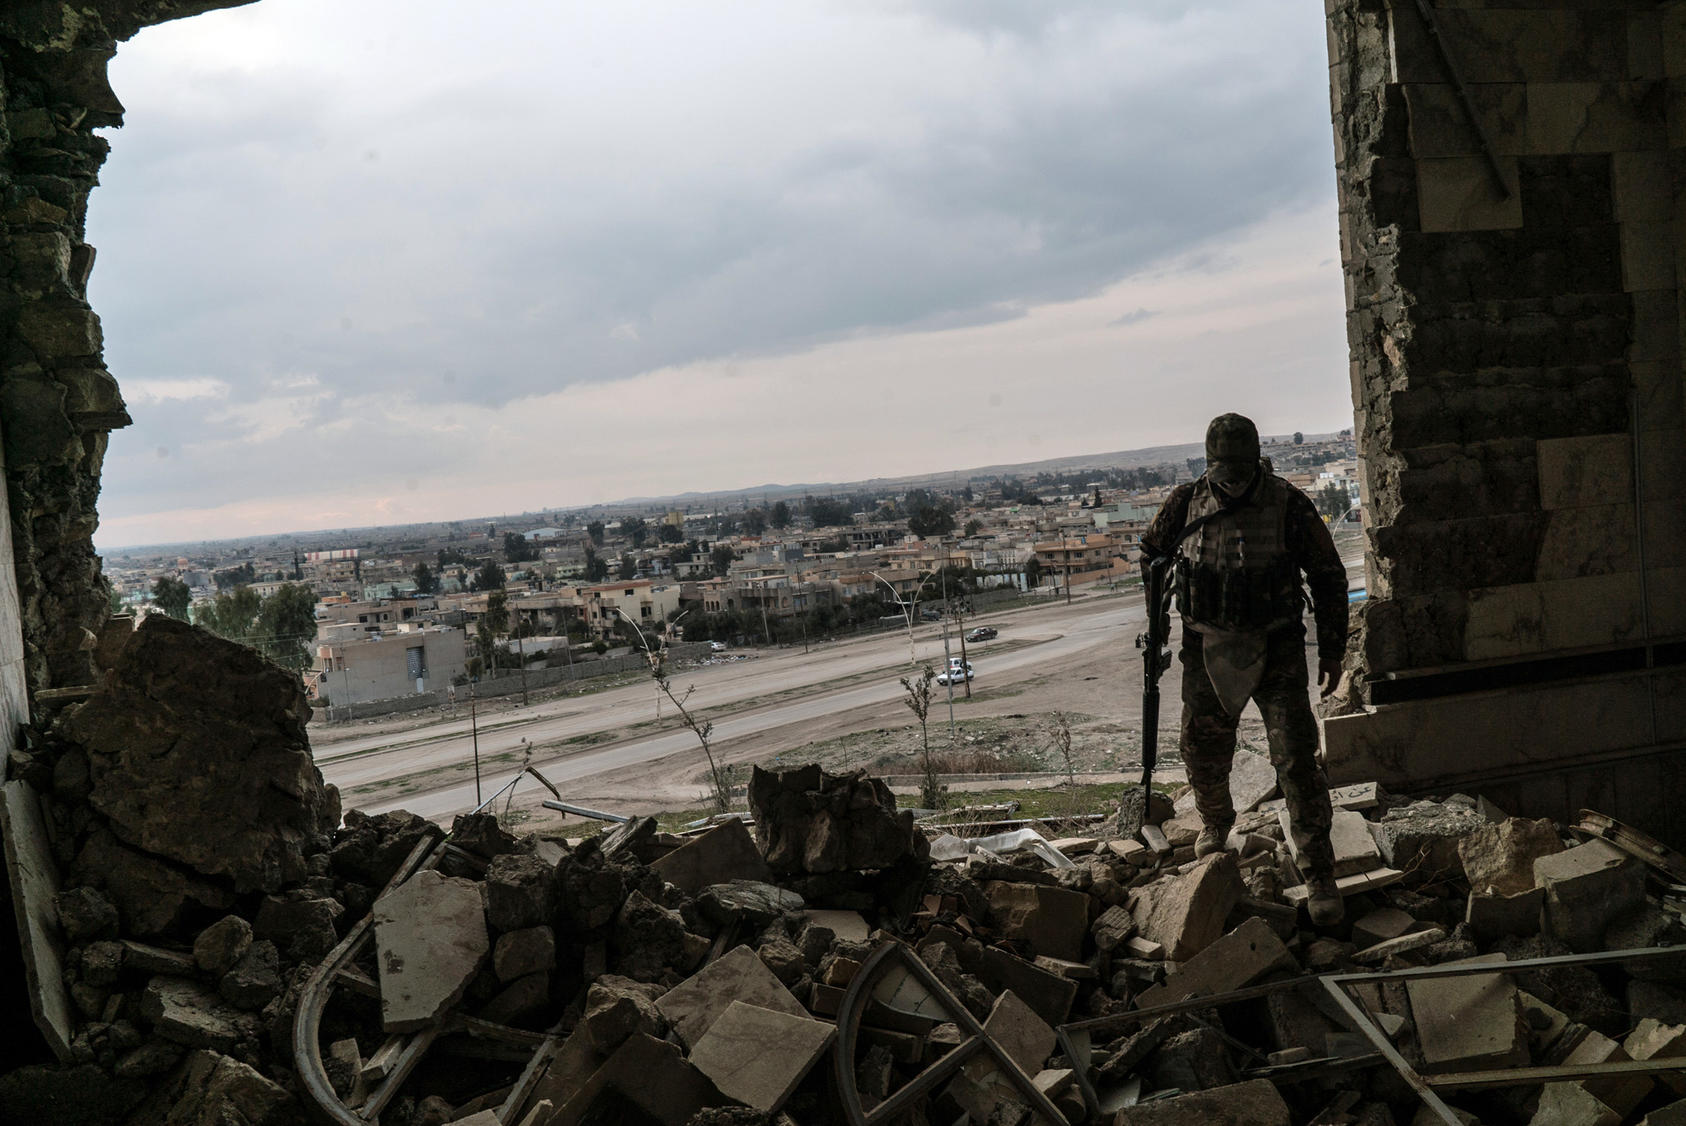 An Iraq soldier in a damaged building in Mosul in February, 2017. The overall push to free Mosul, once Iraq’s second-largest city, began in October, with local troops pushing from the east into the city’s geographically larger but more sparsely populated eastern half. In late January, they reached the banks of the Tigris River, which bisects Mosul, and declared the city’s eastern section liberated. (Ben C. Solomon/The New York Times) 